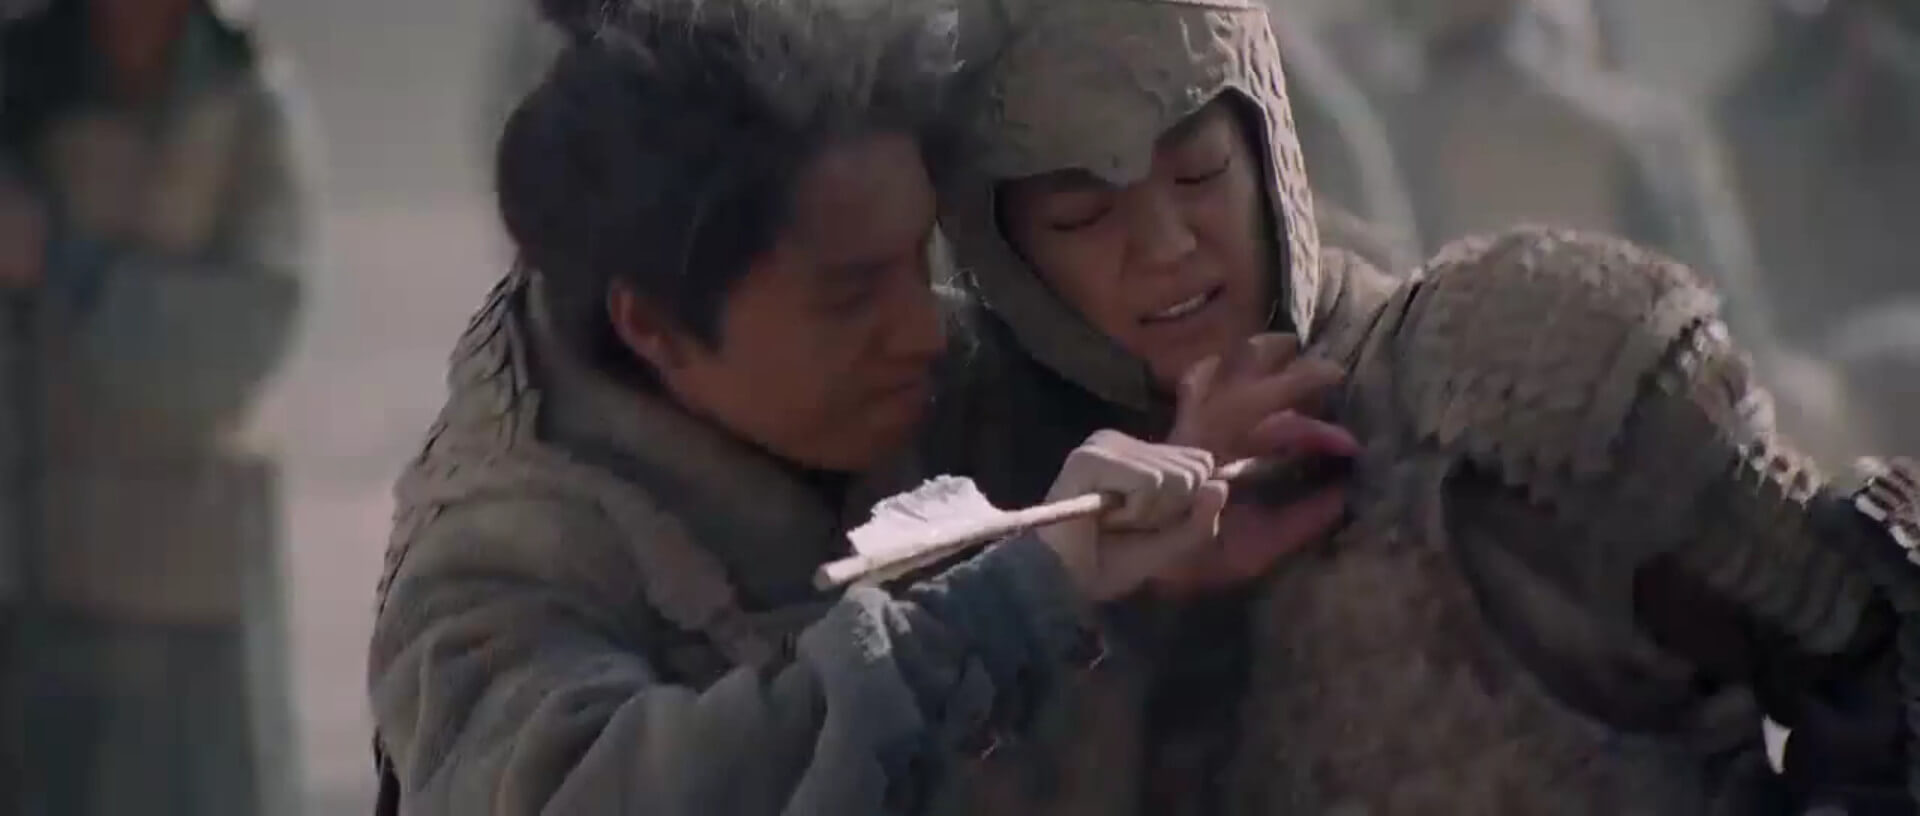 Wentai breaks the arrow in Mulan's chest.